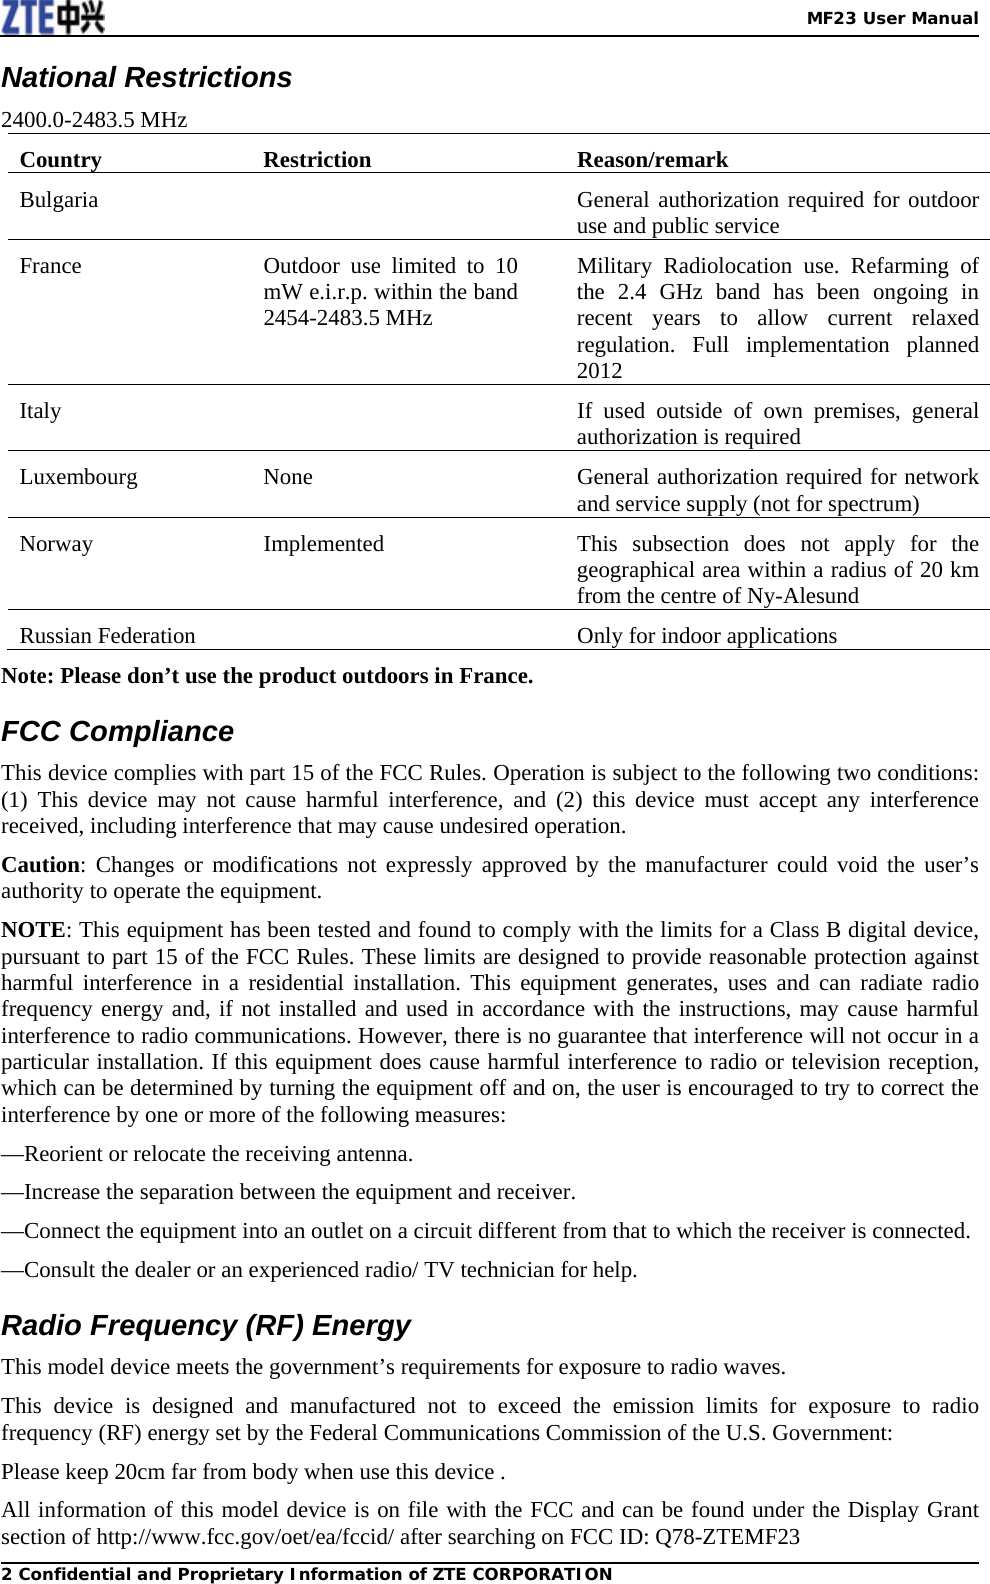   MF23 User Manual2 Confidential and Proprietary Information of ZTE CORPORATIONNational Restrictions 2400.0-2483.5 MHz Country Restriction  Reason/remark Bulgaria    General authorization required for outdoor use and public service   France   Outdoor use limited to 10 mW e.i.r.p. within the band 2454-2483.5 MHz Military Radiolocation use. Refarming of the 2.4 GHz band has been ongoing in recent years to allow current relaxed regulation. Full implementation planned 2012 Italy    If used outside of own premises, general authorization is required Luxembourg None  General authorization required for network and service supply (not for spectrum) Norway  Implemented  This subsection does not apply for the geographical area within a radius of 20 km from the centre of Ny-Alesund Russian Federation    Only for indoor applications Note: Please don’t use the product outdoors in France. FCC Compliance   This device complies with part 15 of the FCC Rules. Operation is subject to the following two conditions: (1) This device may not cause harmful interference, and (2) this device must accept any interference received, including interference that may cause undesired operation. Caution: Changes or modifications not expressly approved by the manufacturer could void the user’s authority to operate the equipment. NOTE: This equipment has been tested and found to comply with the limits for a Class B digital device, pursuant to part 15 of the FCC Rules. These limits are designed to provide reasonable protection against harmful interference in a residential installation. This equipment generates, uses and can radiate radio frequency energy and, if not installed and used in accordance with the instructions, may cause harmful interference to radio communications. However, there is no guarantee that interference will not occur in a particular installation. If this equipment does cause harmful interference to radio or television reception, which can be determined by turning the equipment off and on, the user is encouraged to try to correct the interference by one or more of the following measures: —Reorient or relocate the receiving antenna. —Increase the separation between the equipment and receiver. —Connect the equipment into an outlet on a circuit different from that to which the receiver is connected. —Consult the dealer or an experienced radio/ TV technician for help. Radio Frequency (RF) Energy This model device meets the government’s requirements for exposure to radio waves.     This device is designed and manufactured not to exceed the emission limits for exposure to radio frequency (RF) energy set by the Federal Communications Commission of the U.S. Government: Please keep 20cm far from body when use this device . All information of this model device is on file with the FCC and can be found under the Display Grant section of http://www.fcc.gov/oet/ea/fccid/ after searching on FCC ID: Q78-ZTEMF23 